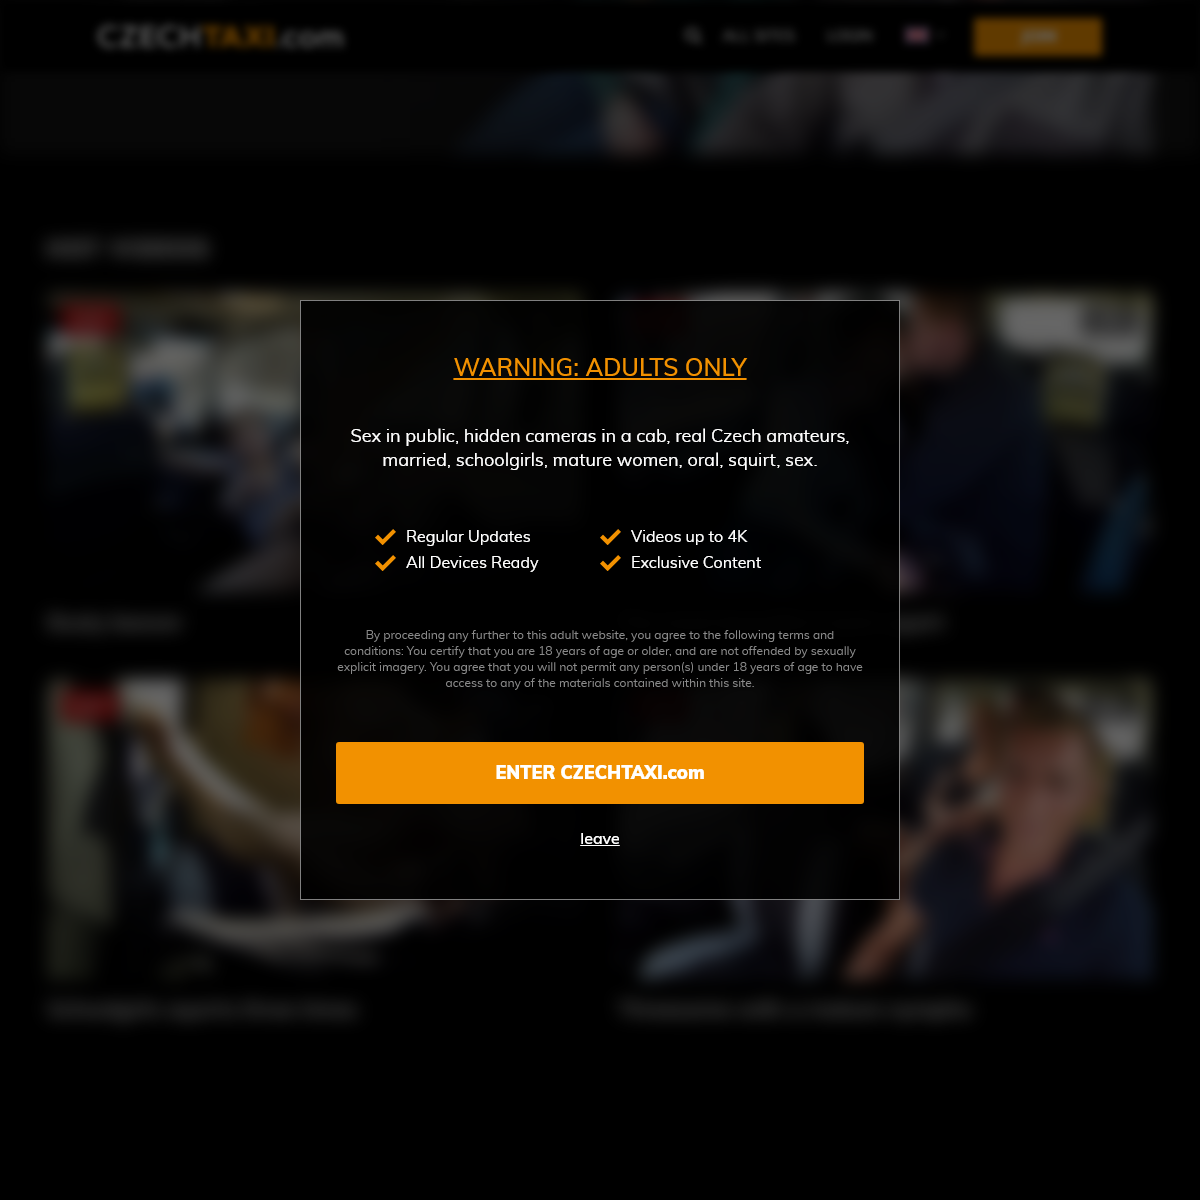 A complete backup of czechtaxi.com